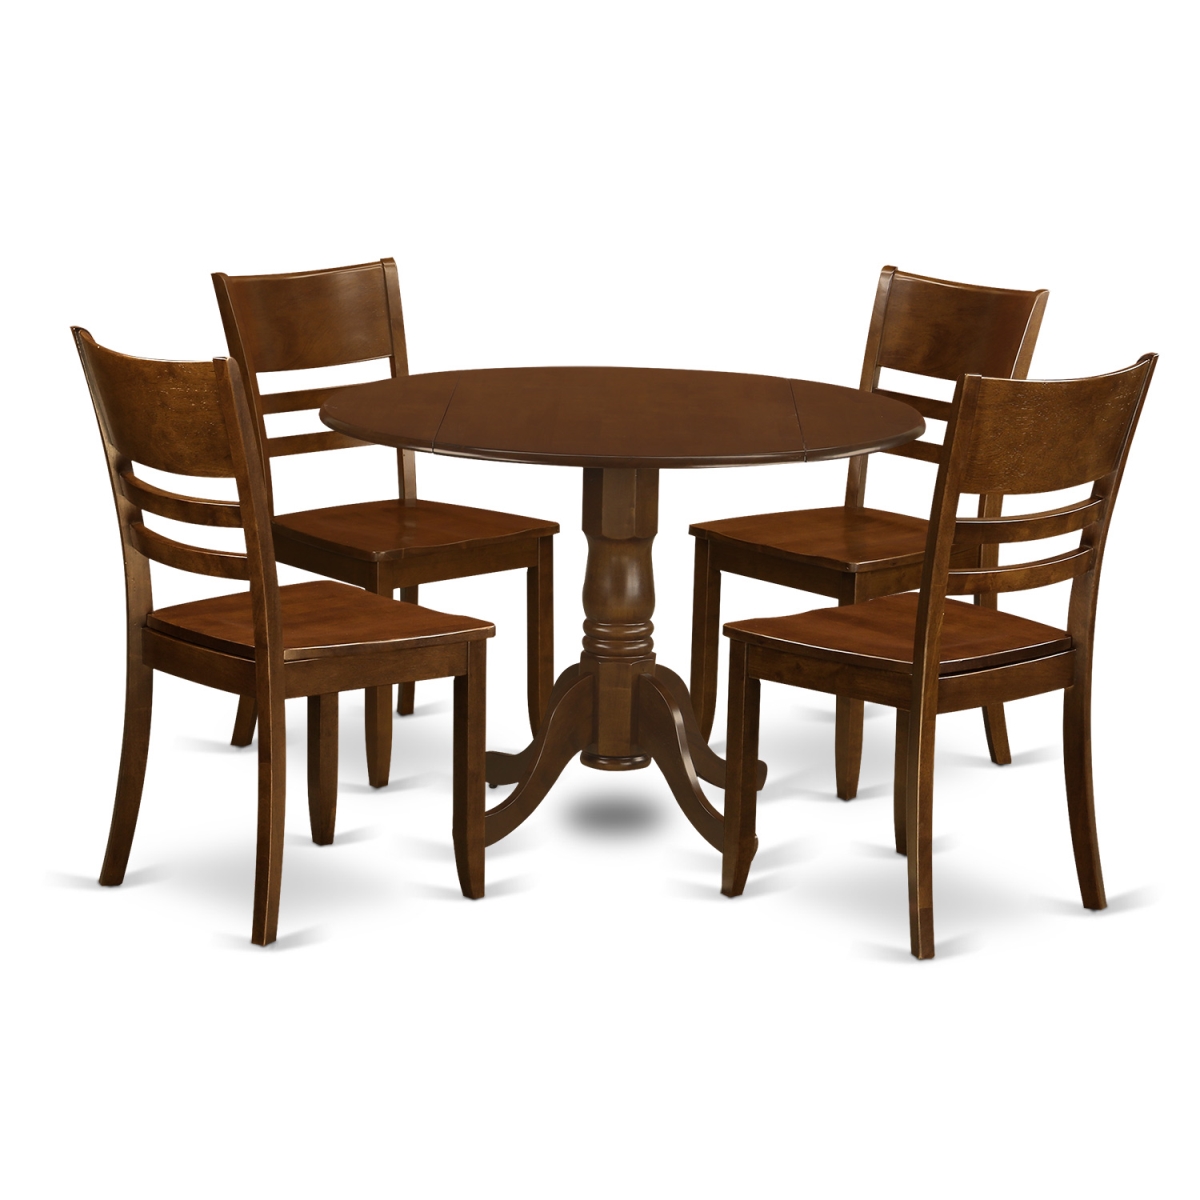 Picture of East West Furniture DLLY5-ESP-W Dublin Dining Set with 2 Drop Leaf & Four Solid Wood Seat Chairs, Espresso - 9 in. - 5 Piece